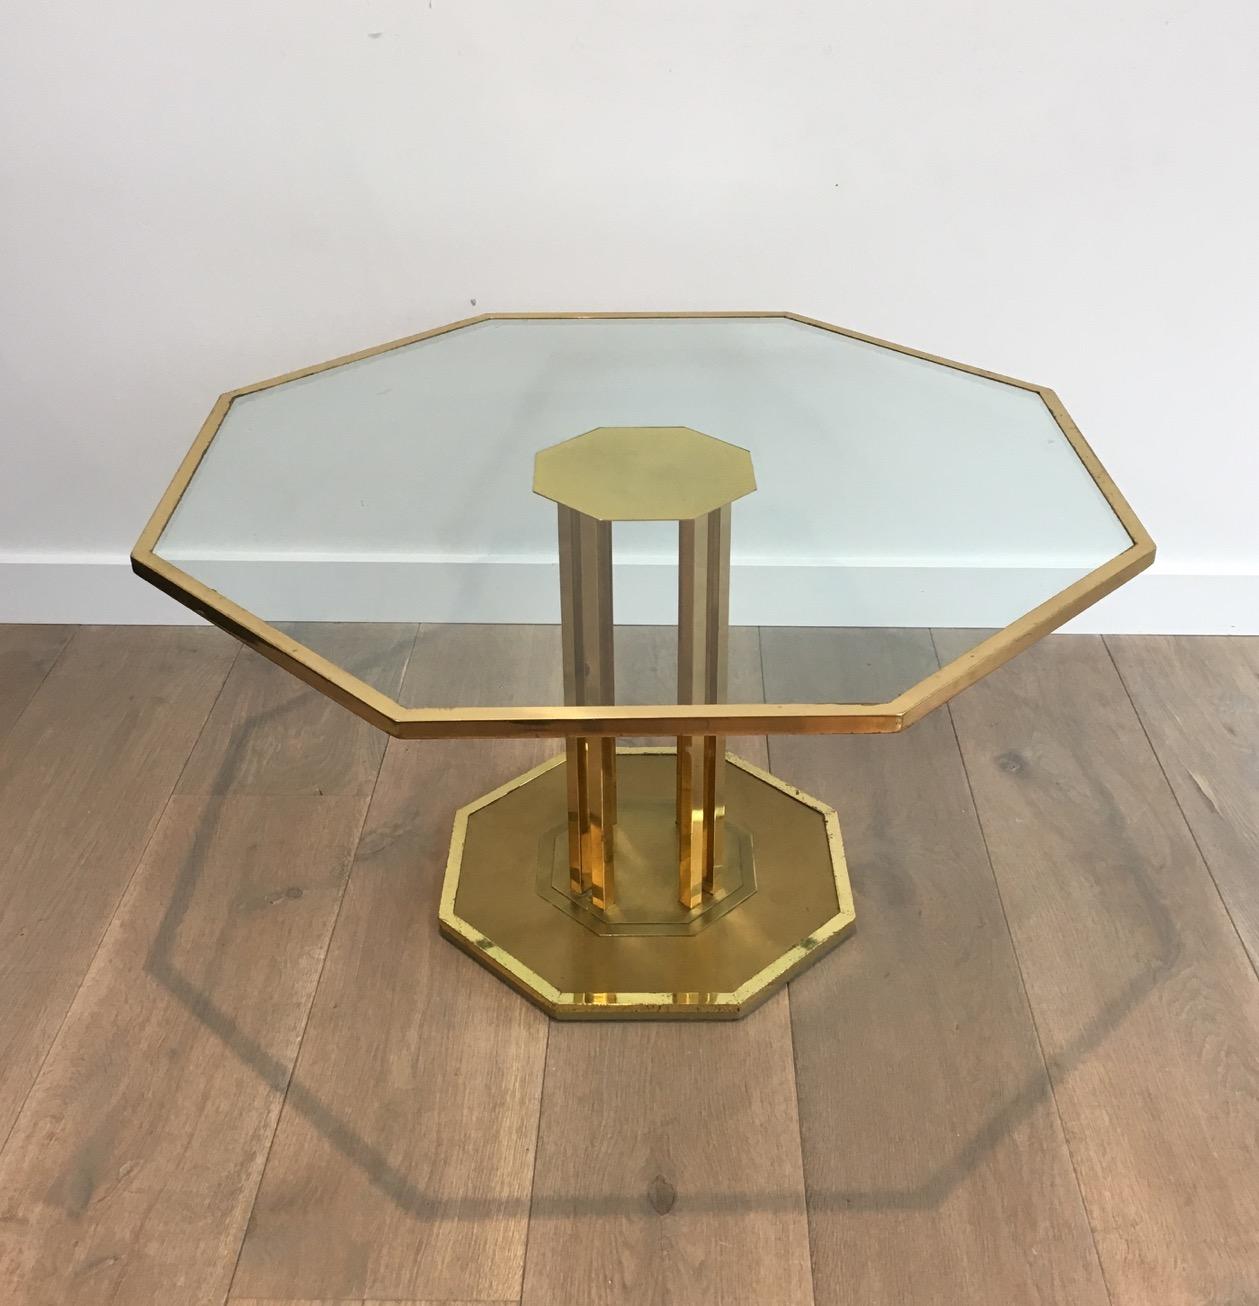 Rare Octagonal Brass and Glass Design Coffee Table, French, circa 1970 For Sale 9